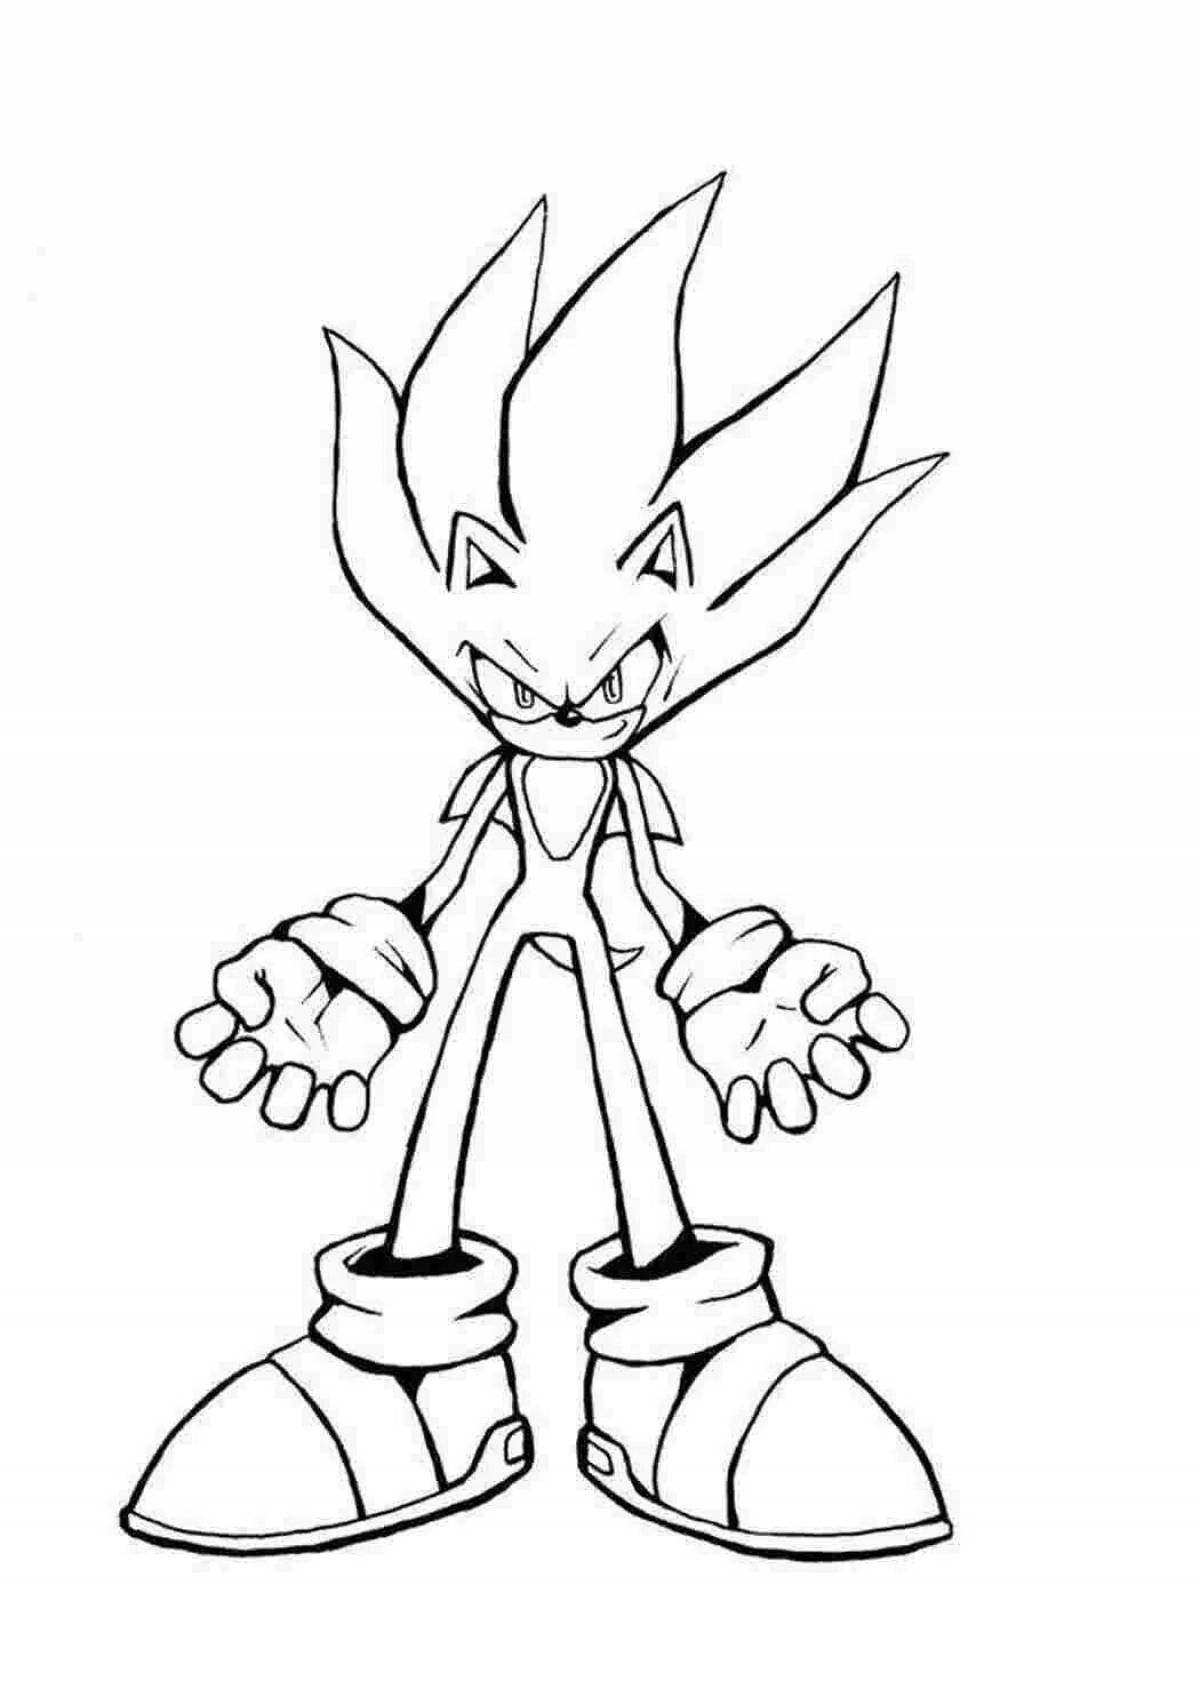 Animated super sonic exe coloring book